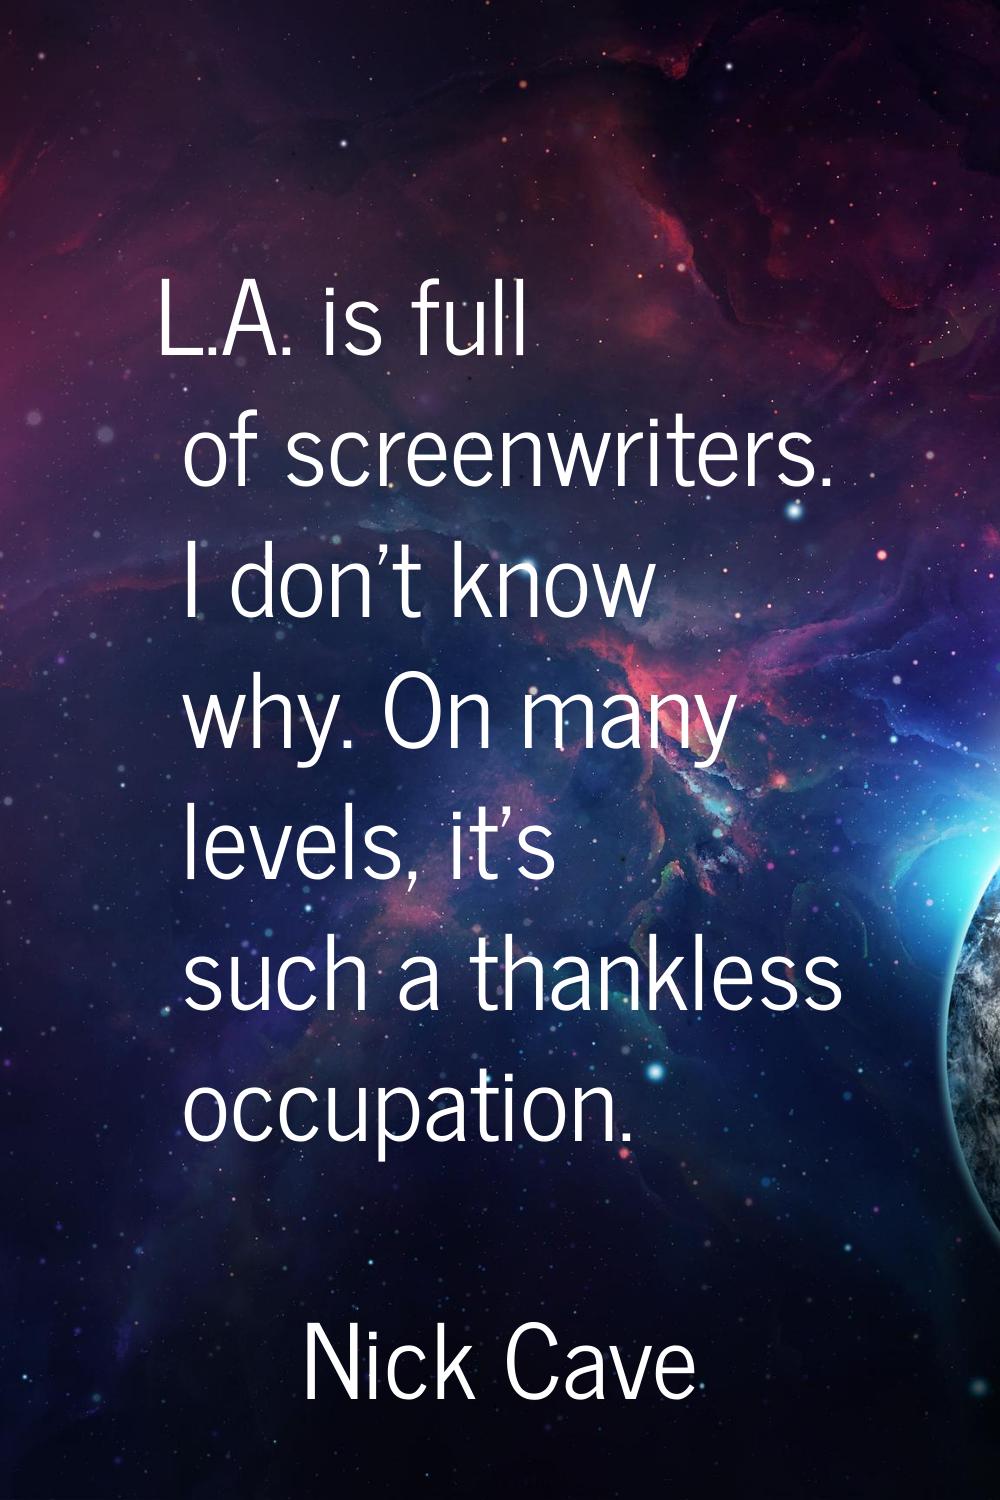 L.A. is full of screenwriters. I don't know why. On many levels, it's such a thankless occupation.